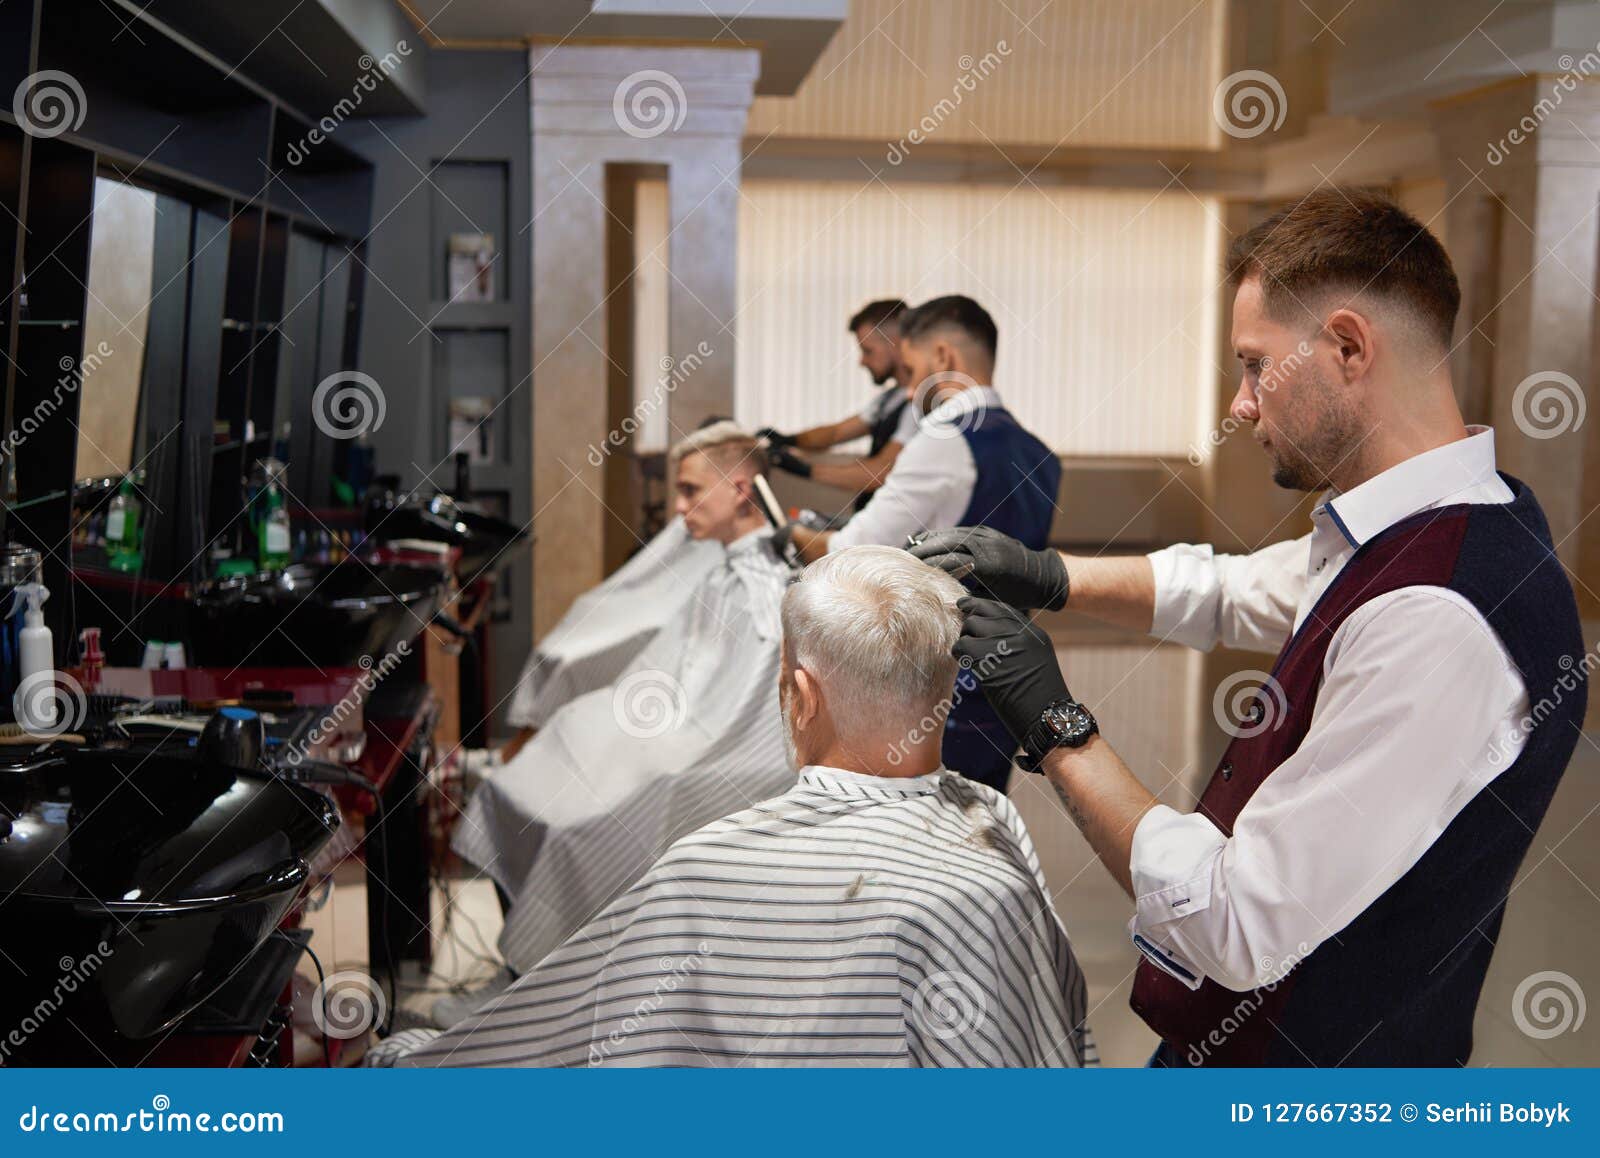 Male Hairdressers Grooming Client S Haircuts In Barbershop Stock